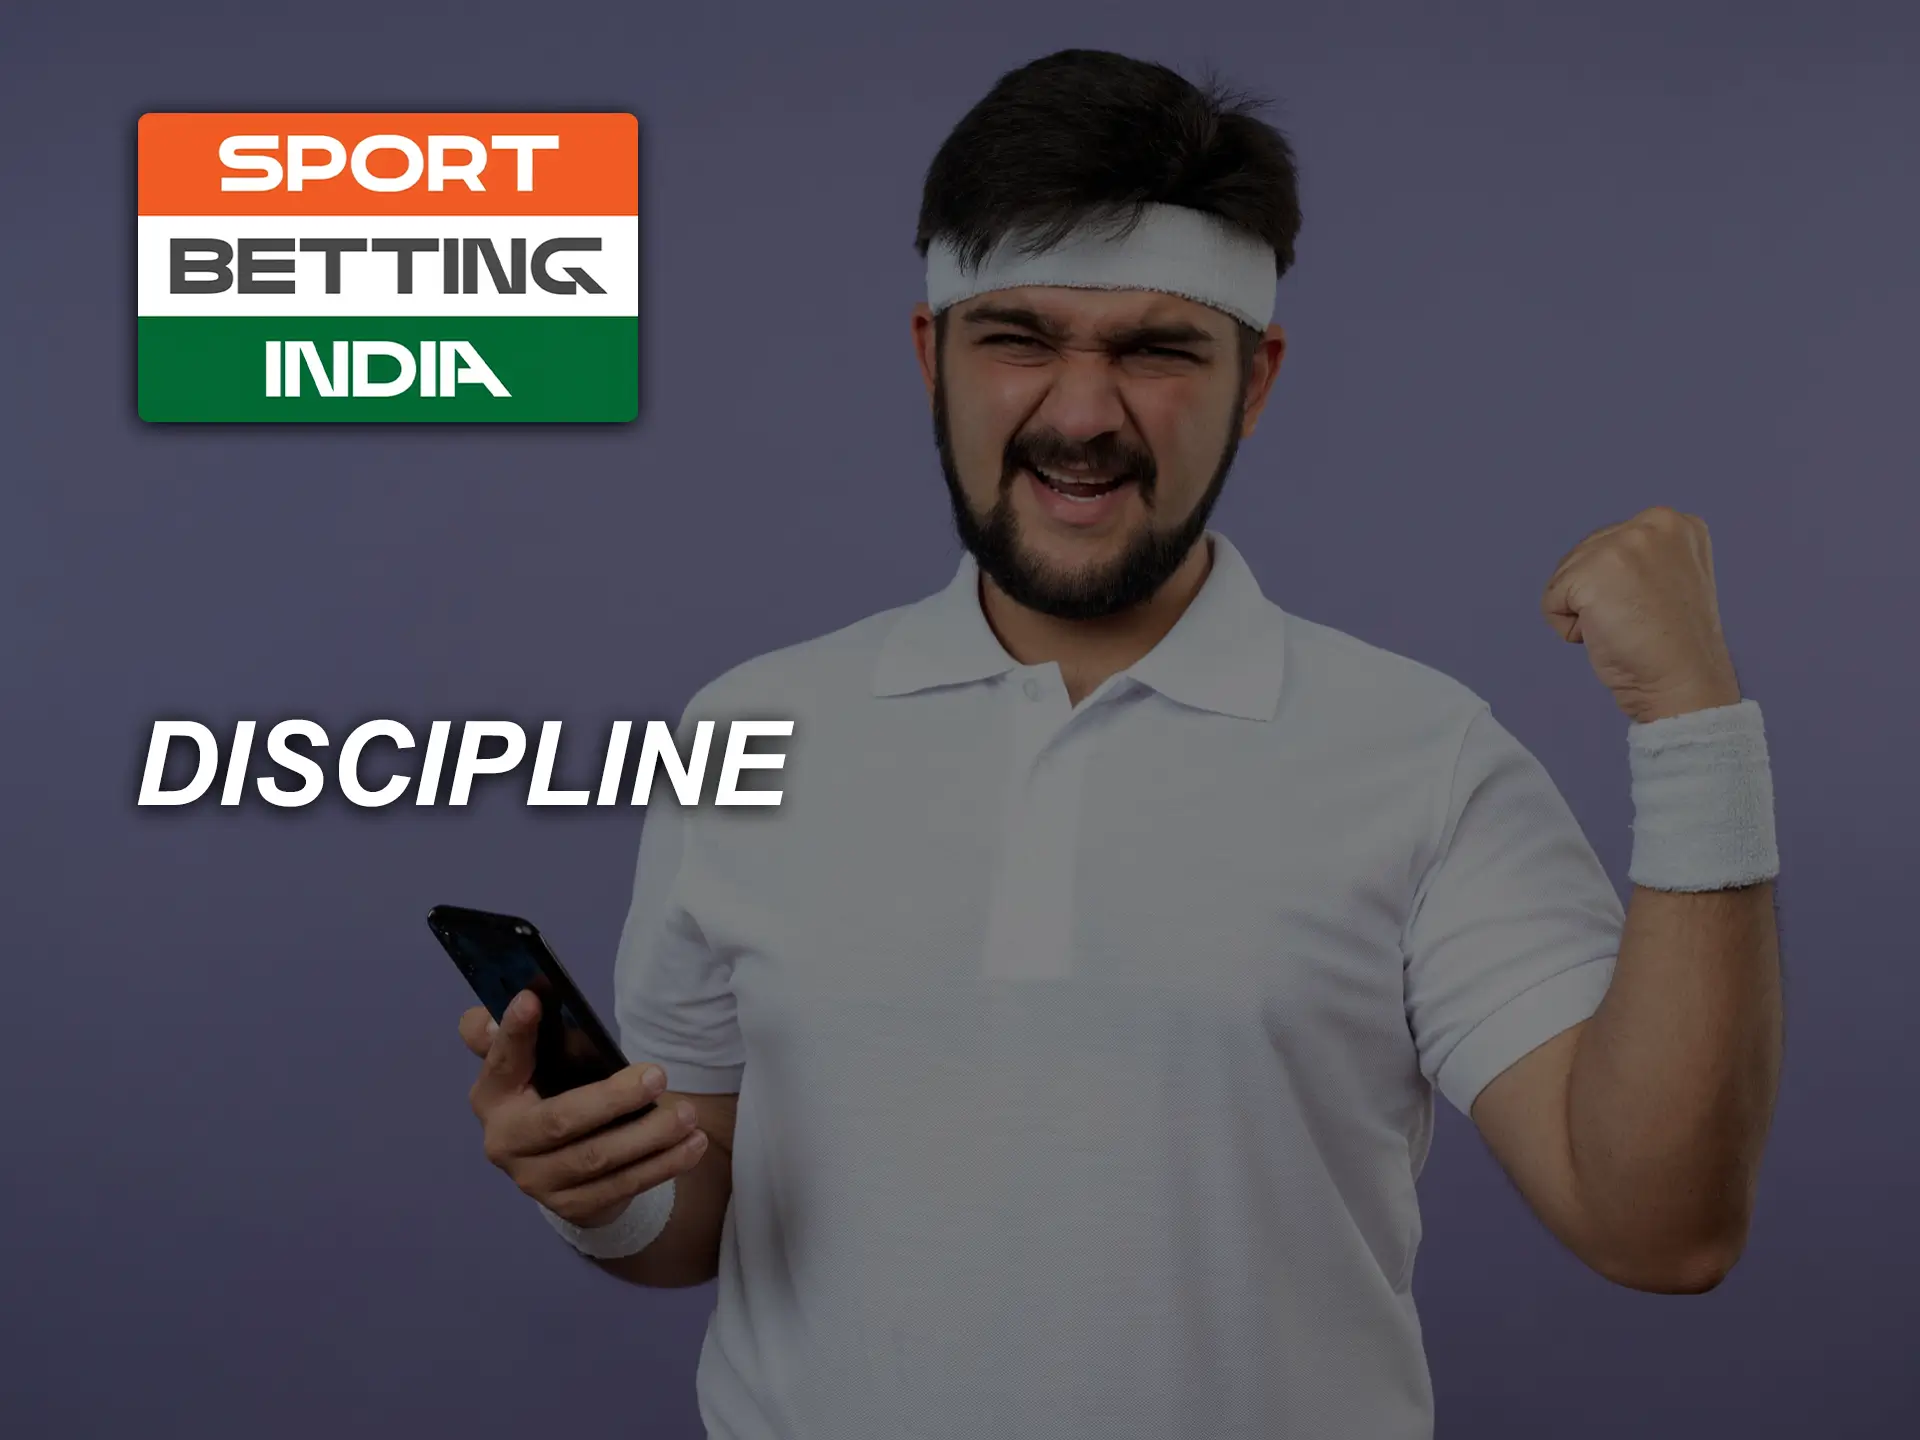 Discipline is the key to high returns in betting, so don't let the temptation to make a risky bet overpower you.